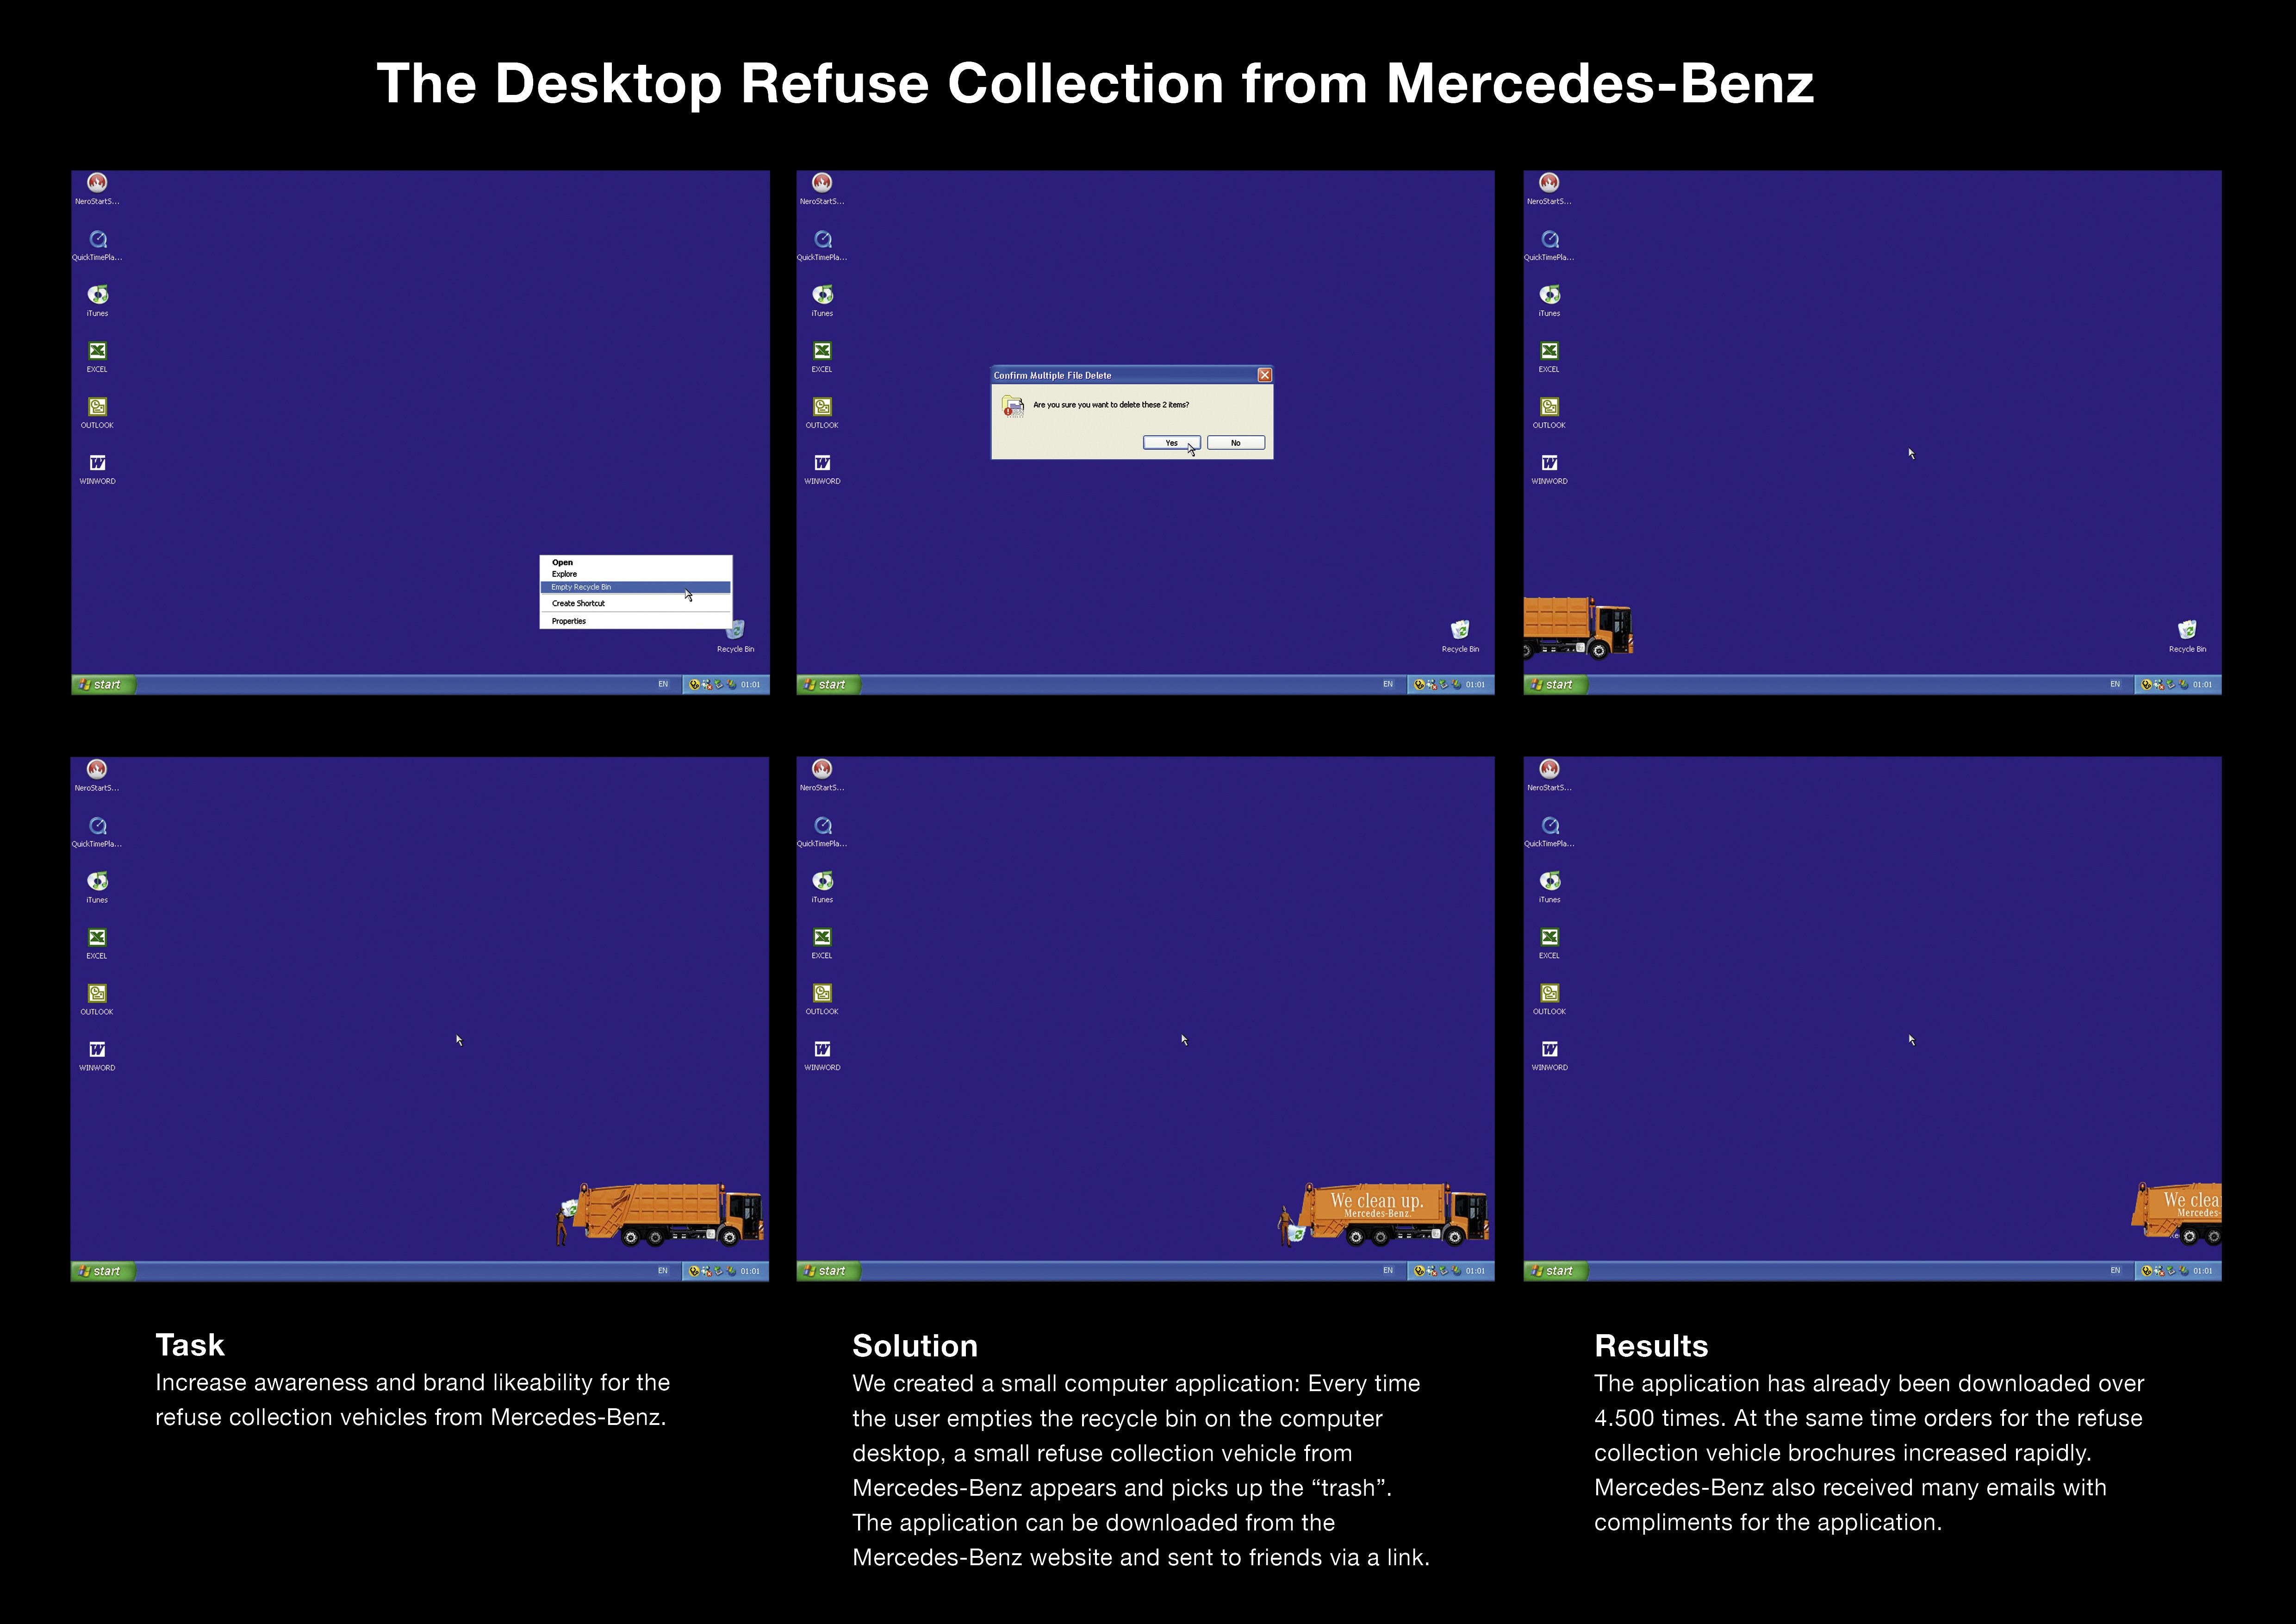 MERCEDES-BENZ REFUSE COLLECTION VEHICLES